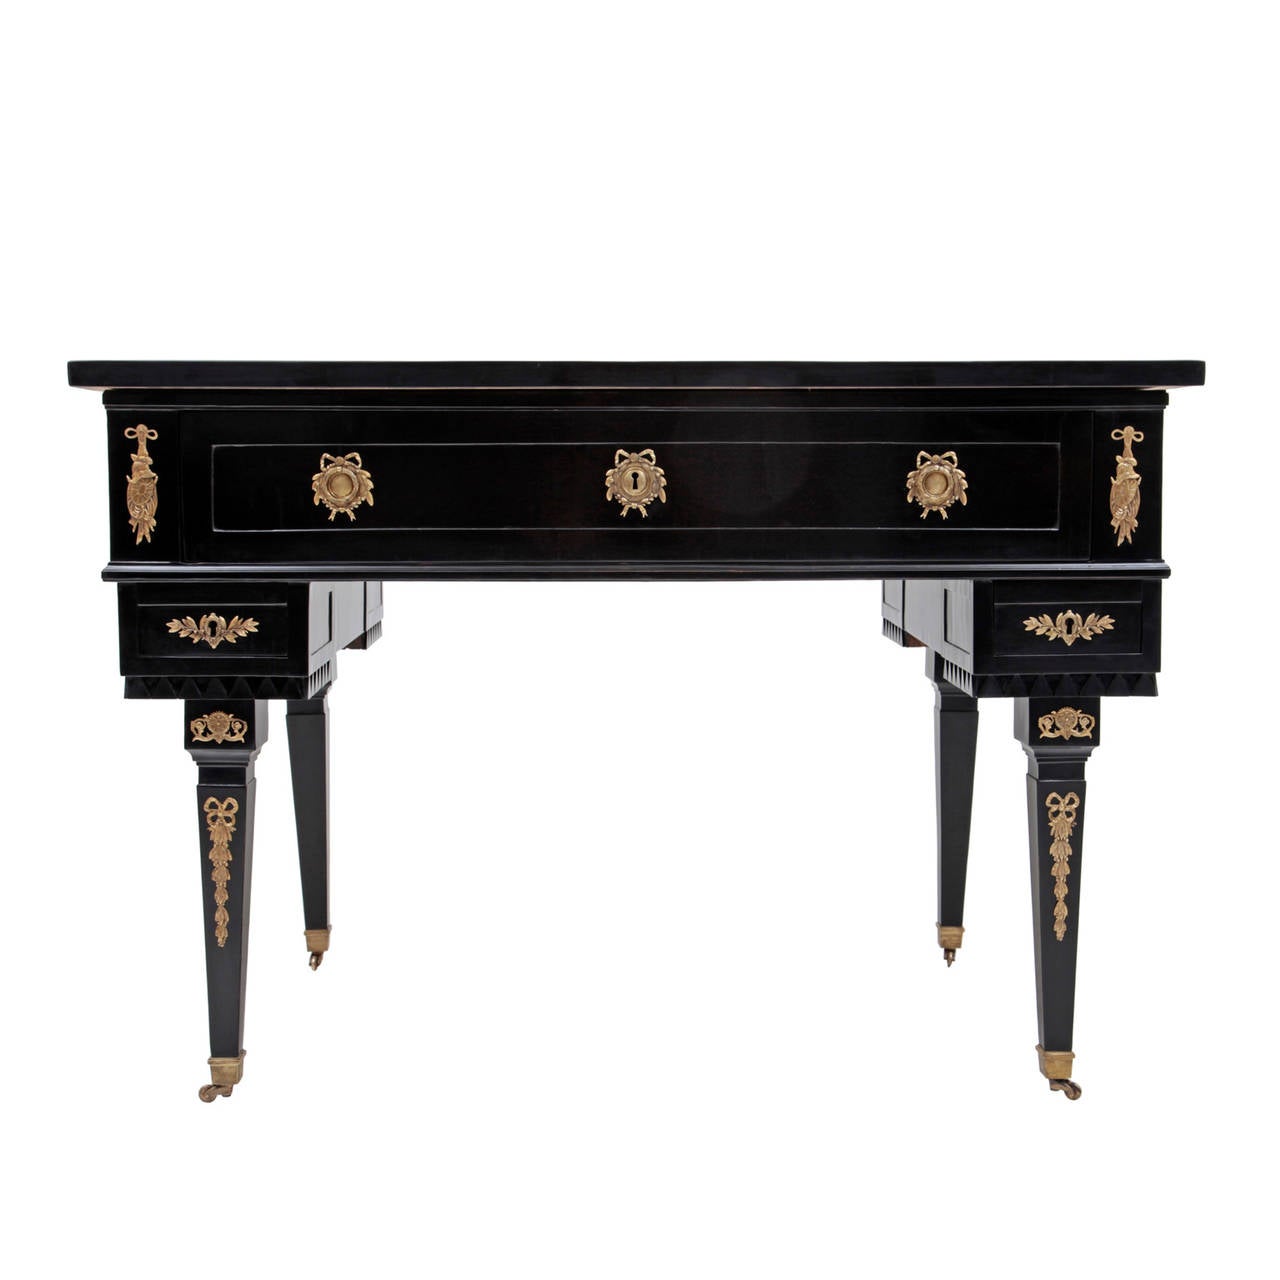 Czech Elegant Classicist Writing Desk from the Early 19th Century